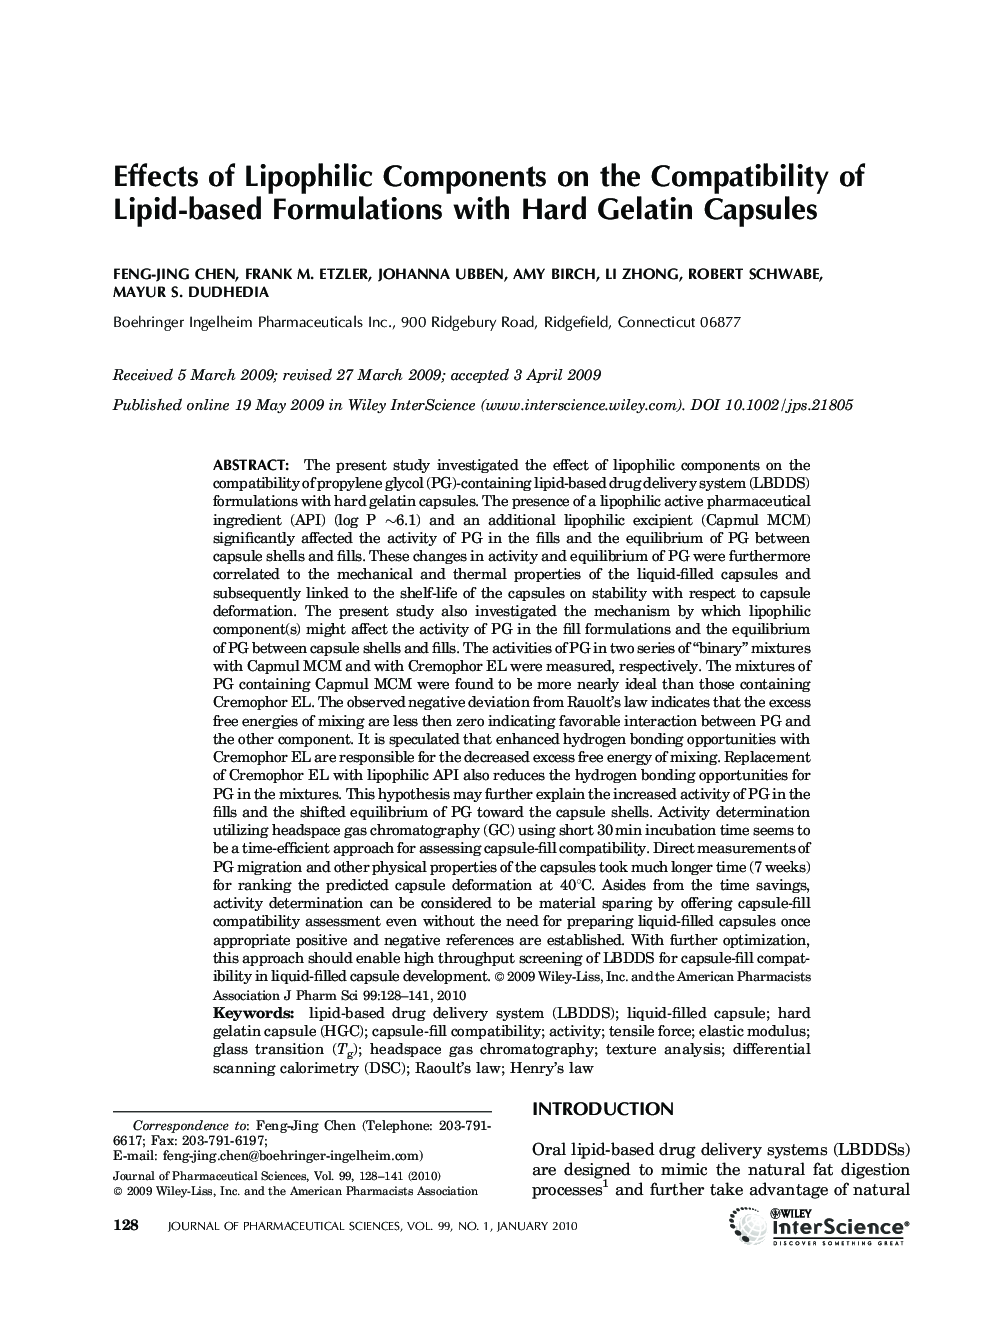 Effects of lipophilic components on the compatibility of lipid-based formulations with hard gelatin capsules